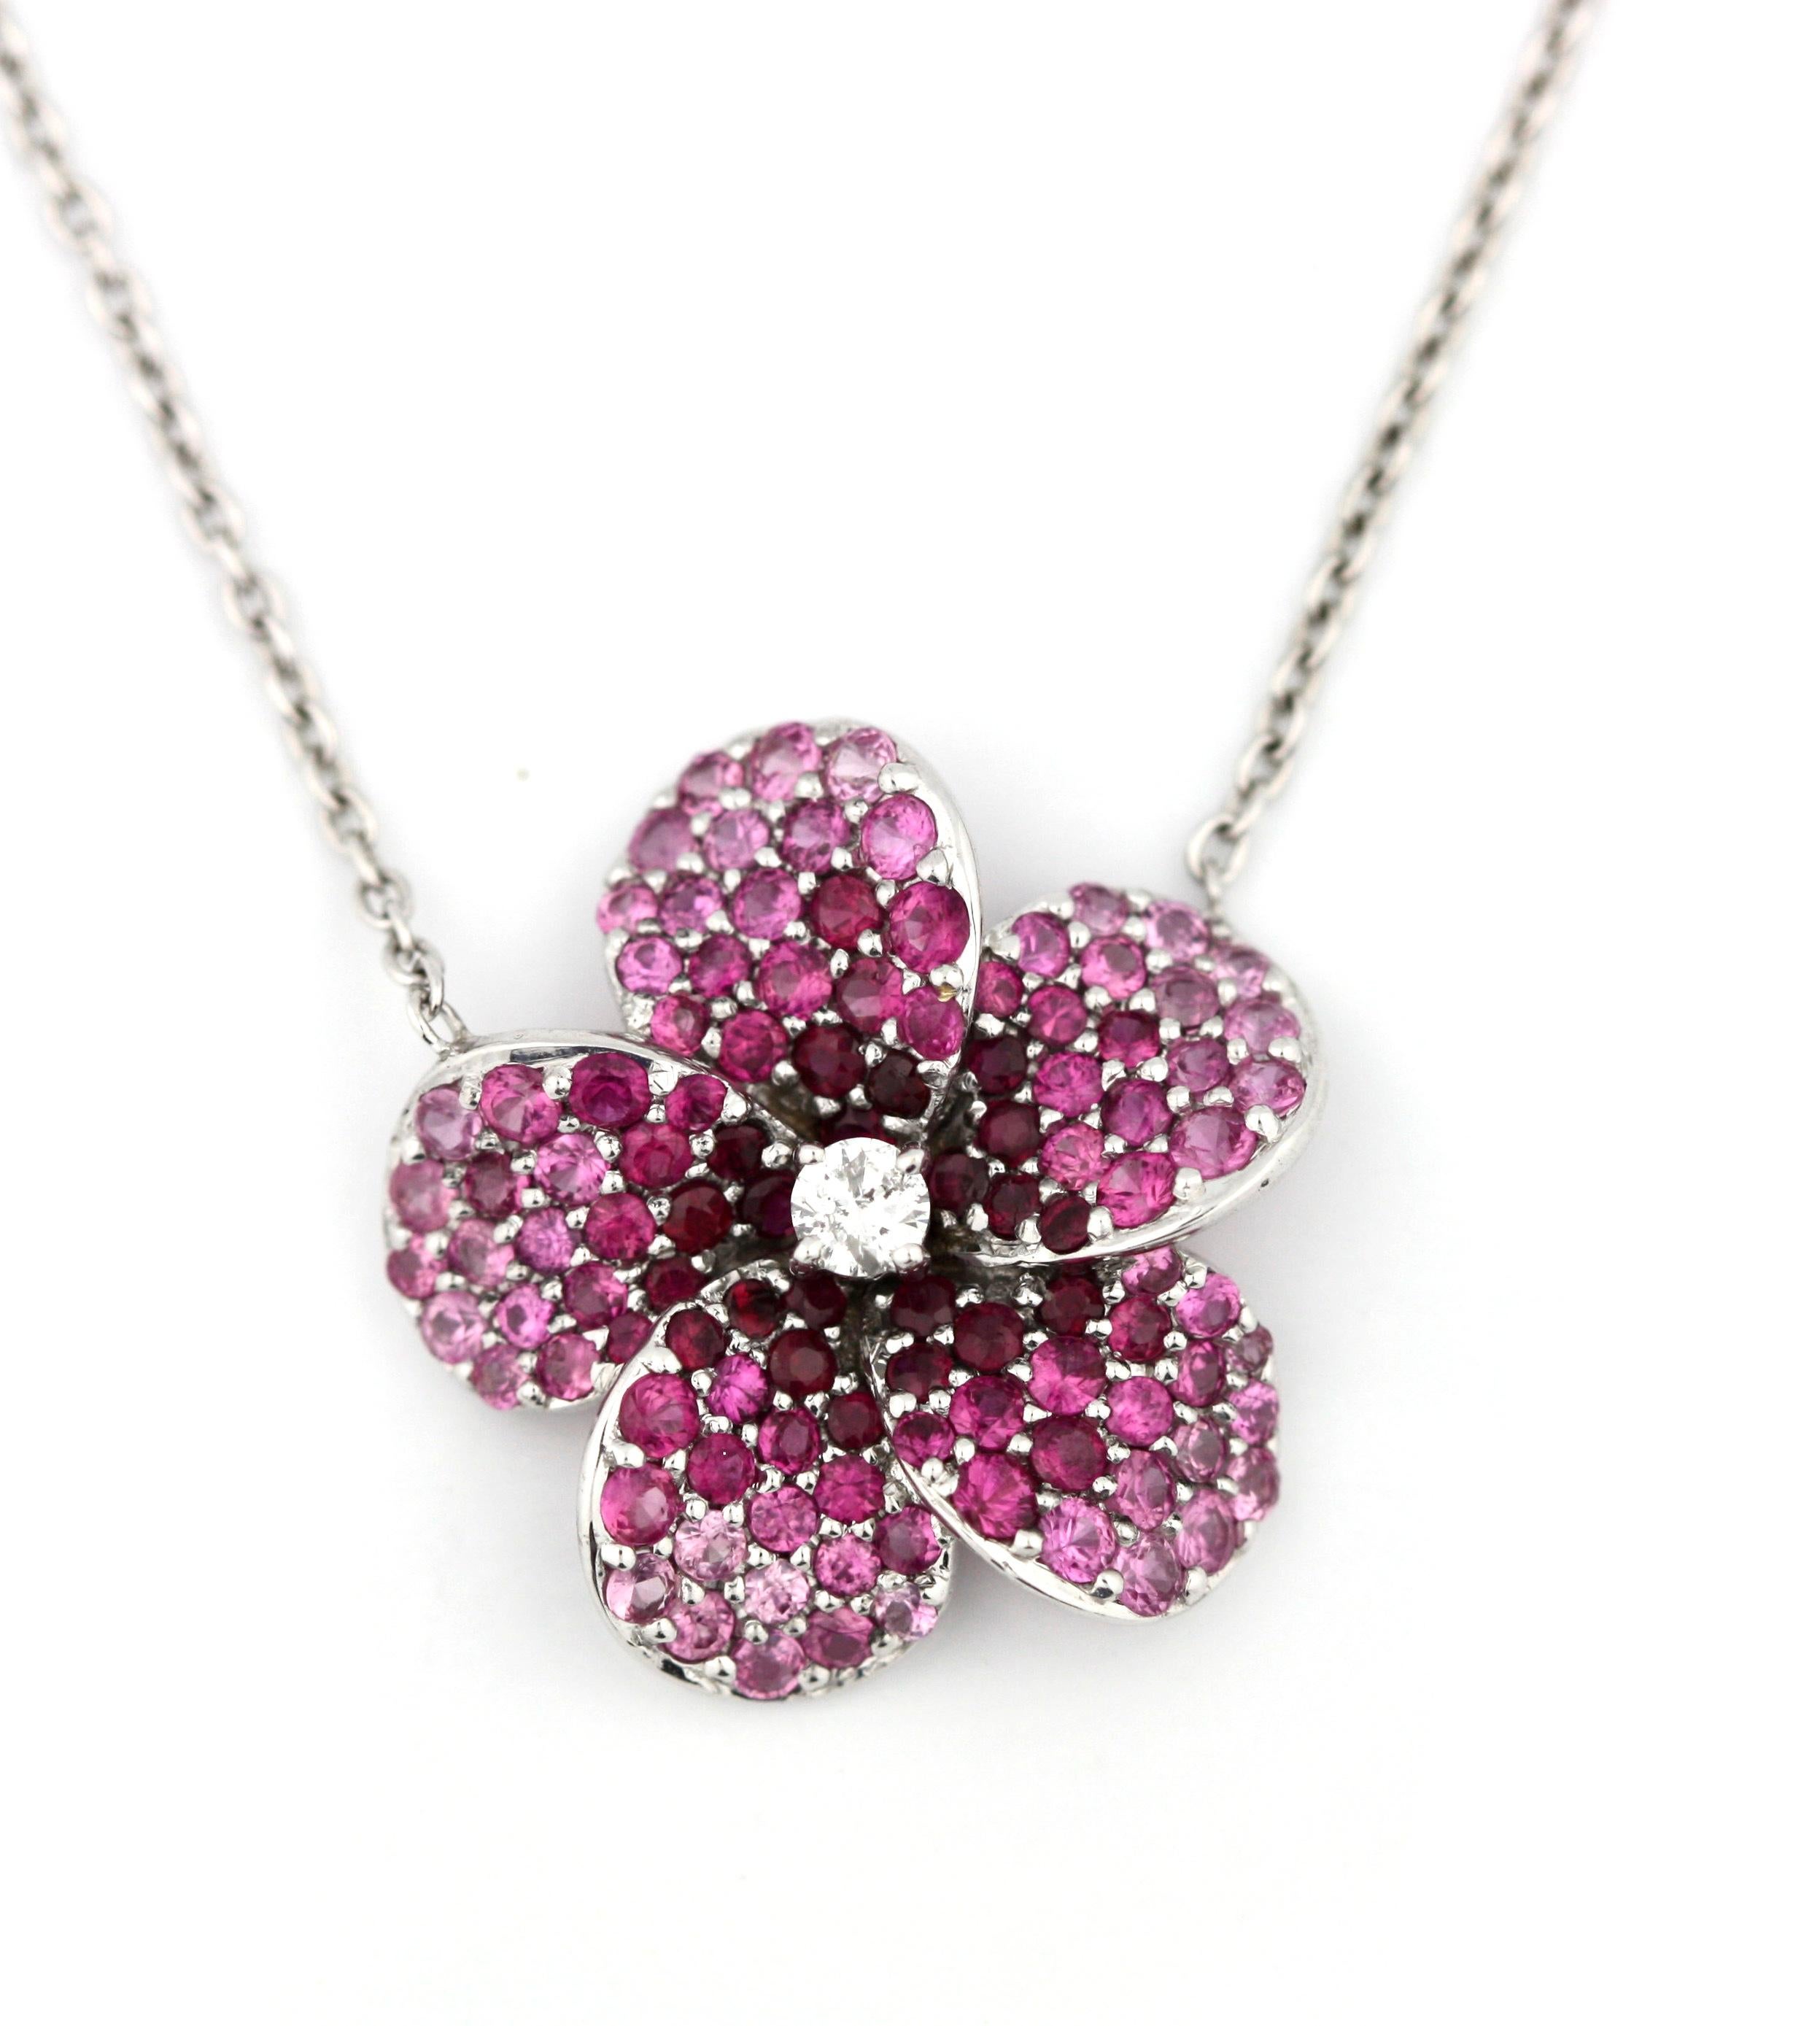 Ruby and Diamond Pendant-Necklace
Of flower design, centering a single-cut diamond, accented by rubies, completed by a white gold chain. Rubies weighing approximately 1.86 carats
Length 18 inches, 18 karat white gold
